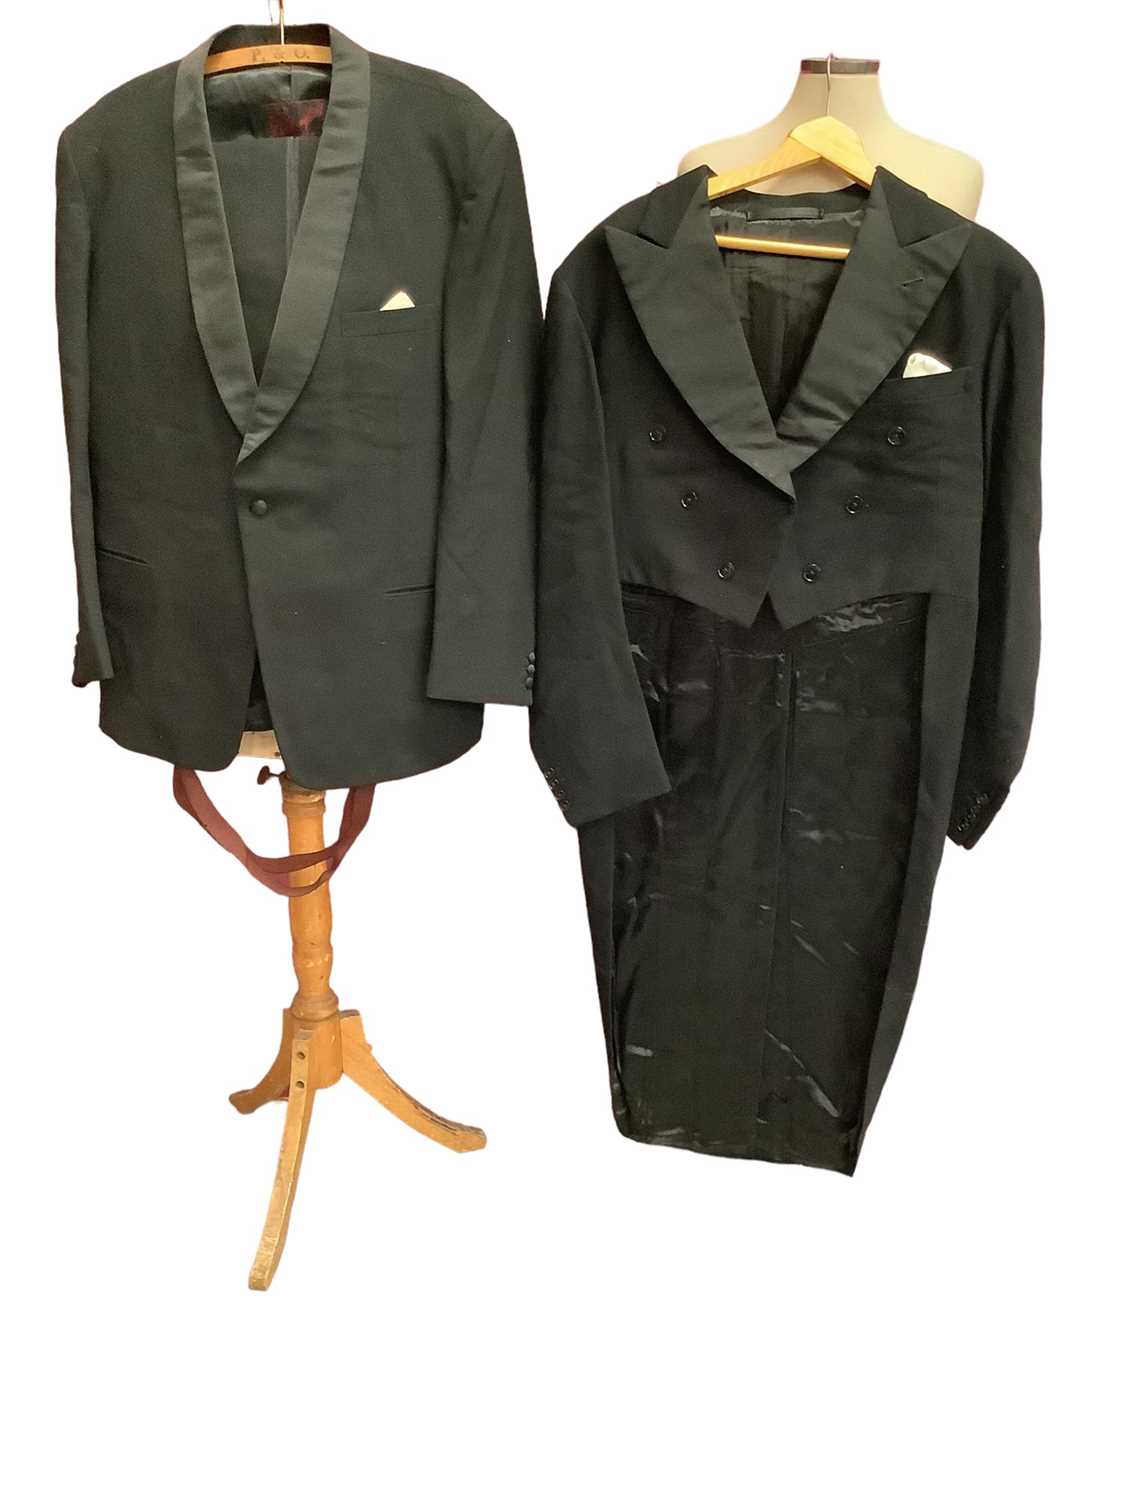 Lot 2063 - Gentlemen's vintage clothing including University of Liverpool blazer, ties, breeches, black dinner jacket, tailcoat and two pairs of black trousers.